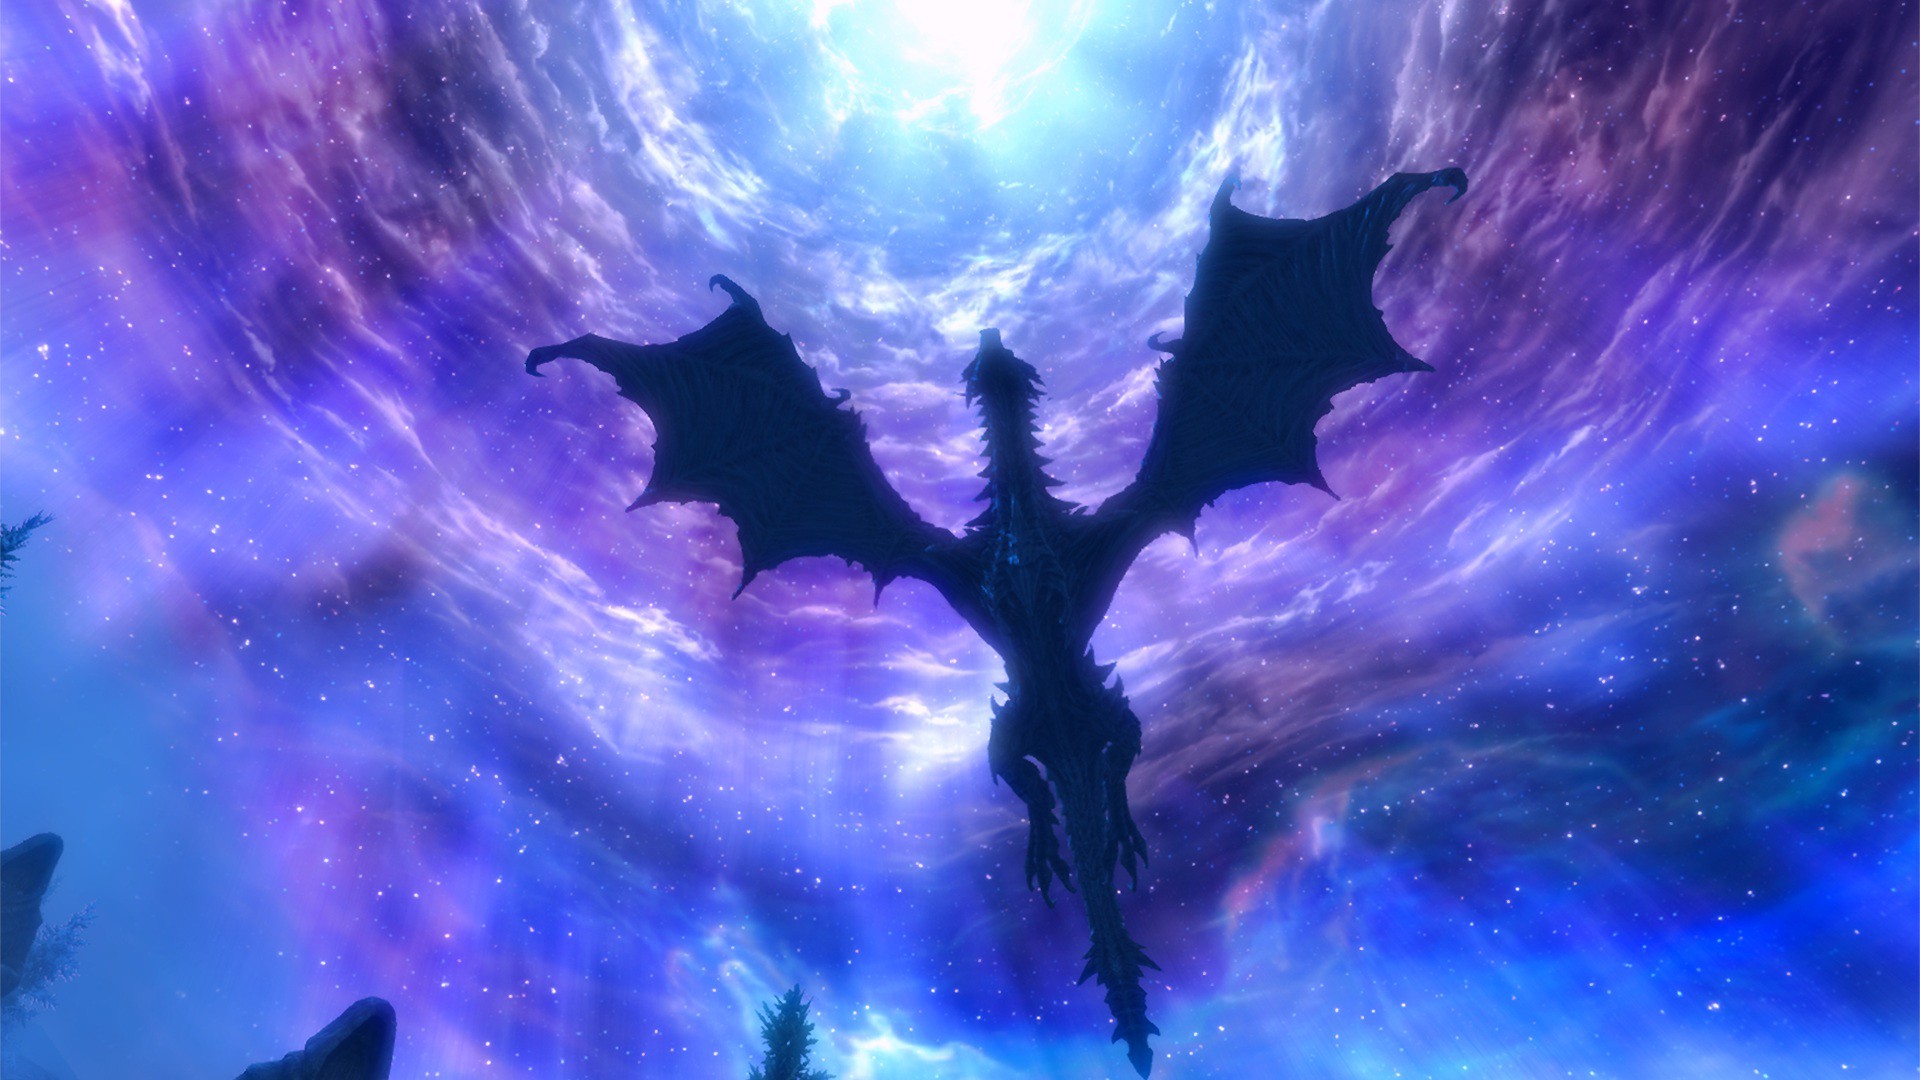 Purple Dragons Wallpaper Skyscapes